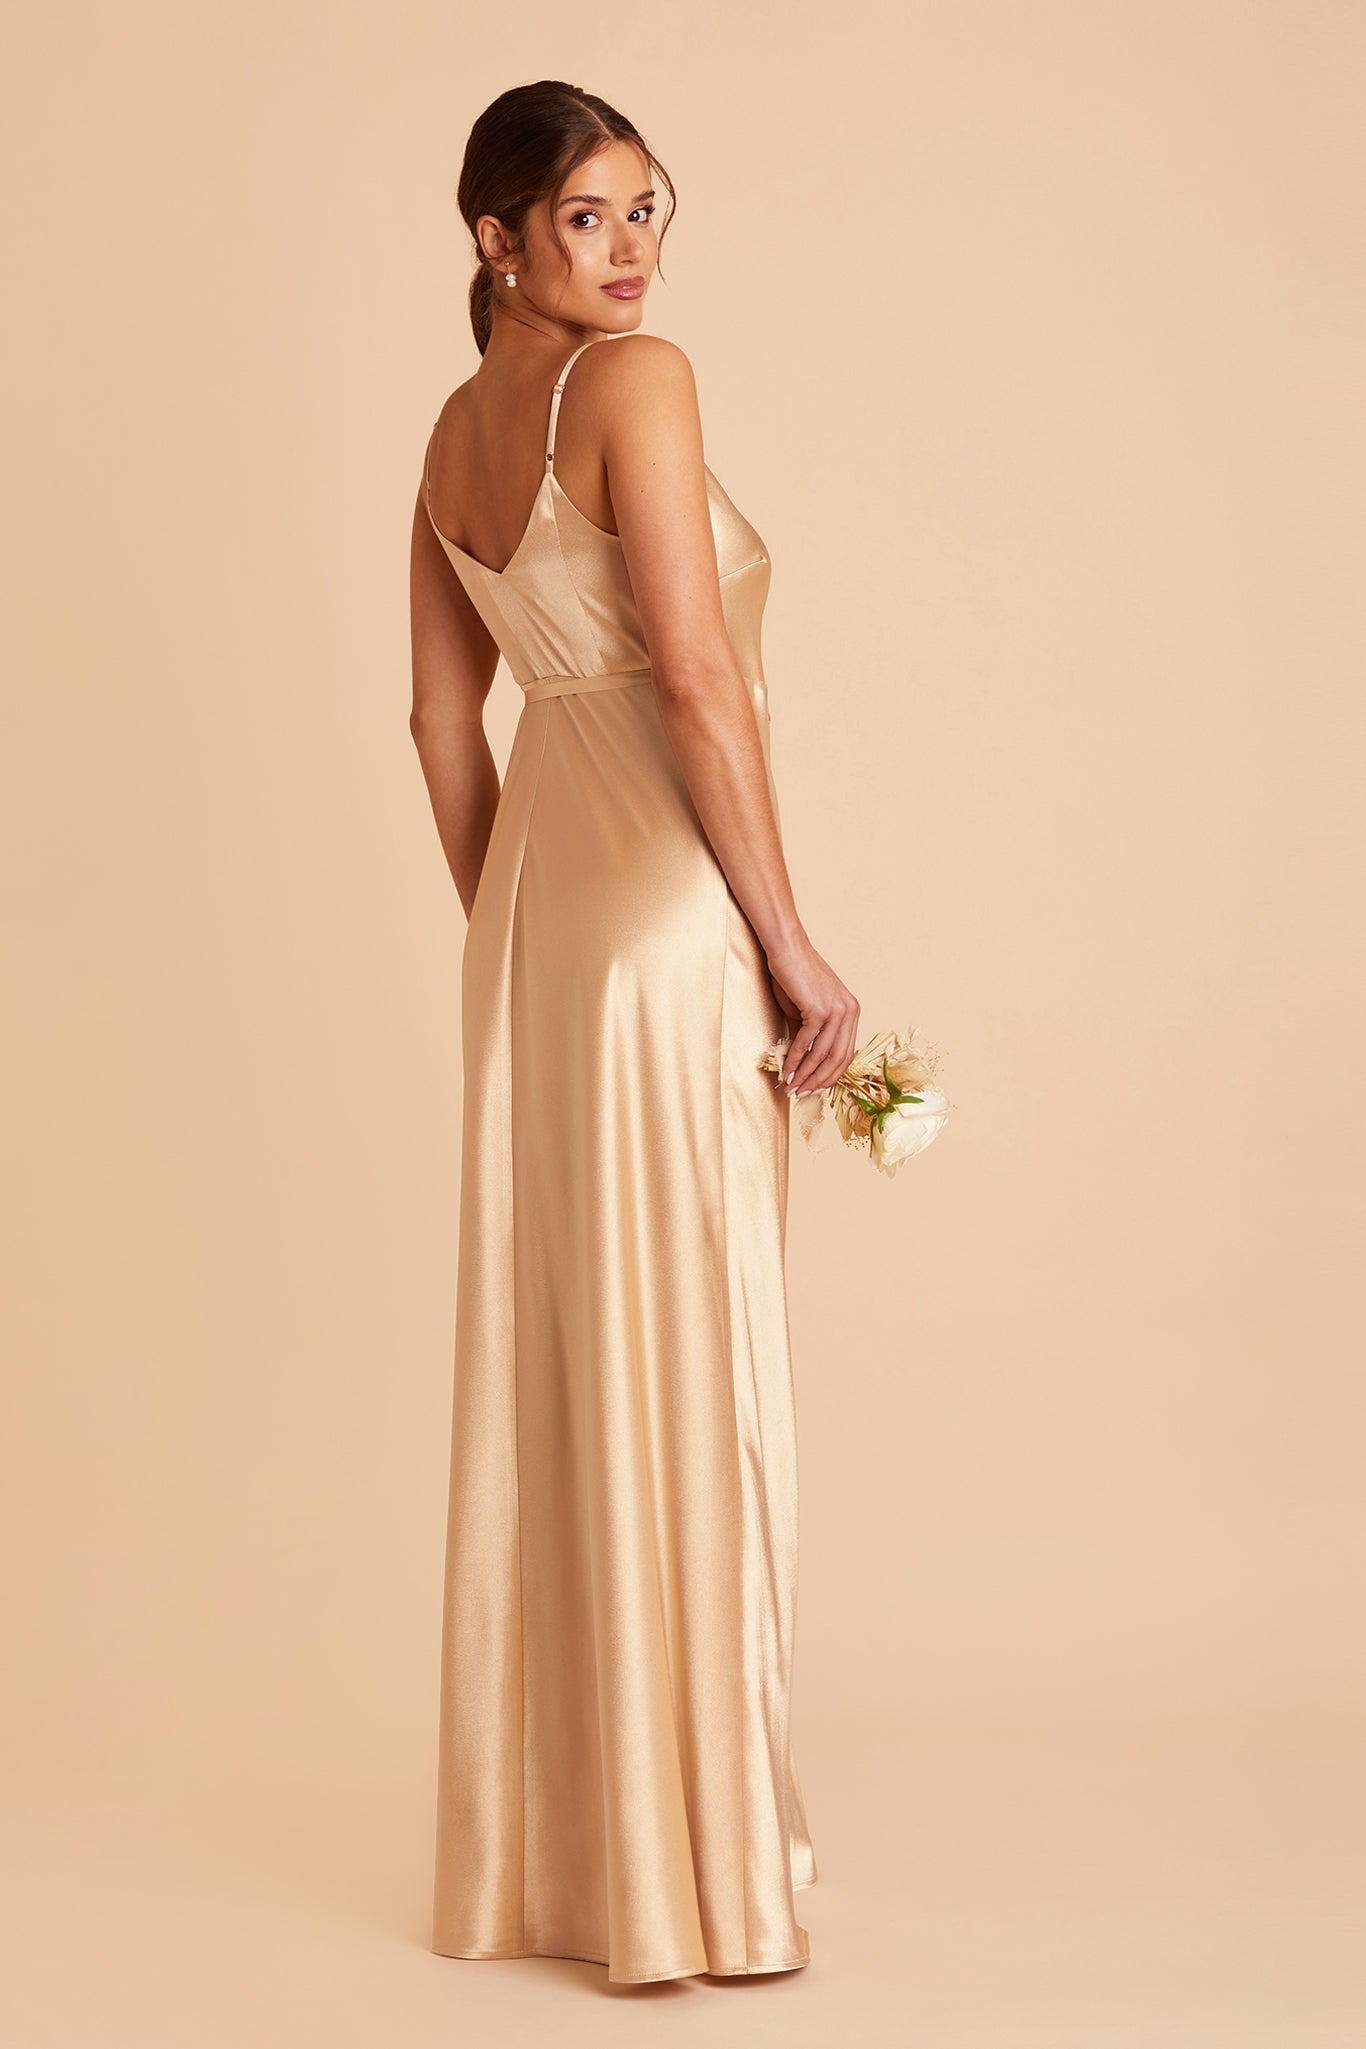 Cindy Satin Dress in gold satin by Birdy Grey, front view